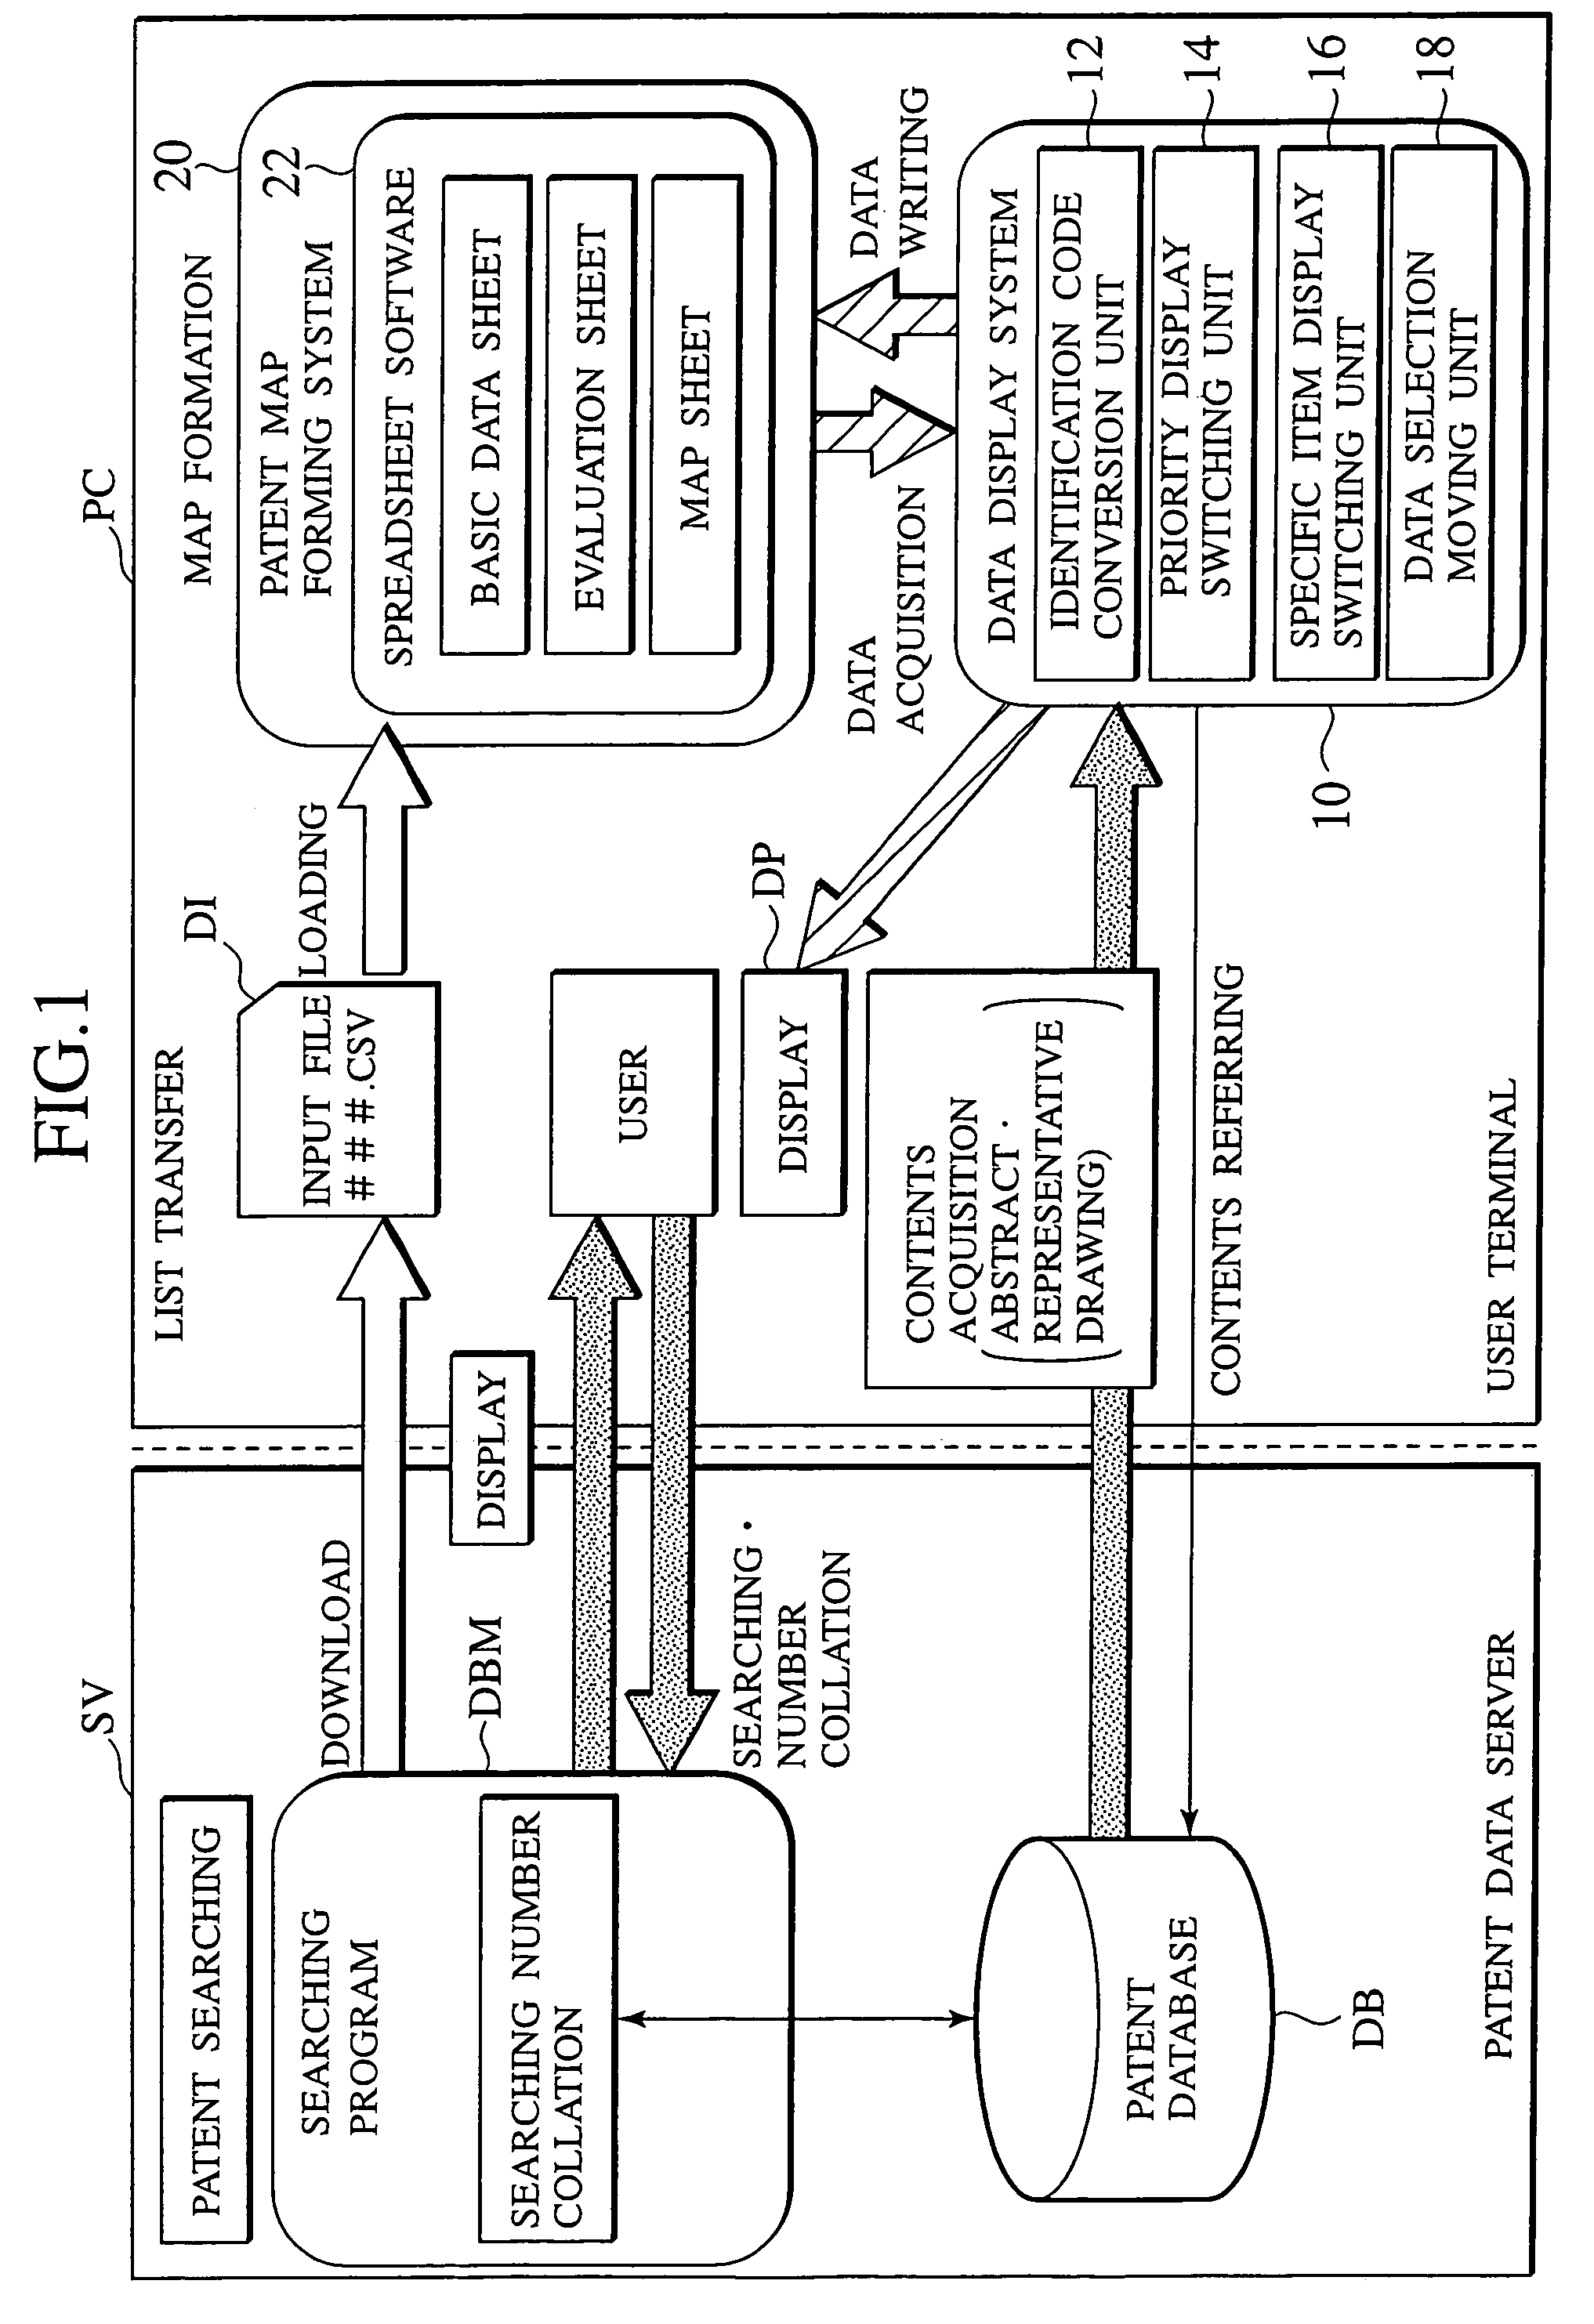 Data map forming system and method of forming a data map based on evaluation values